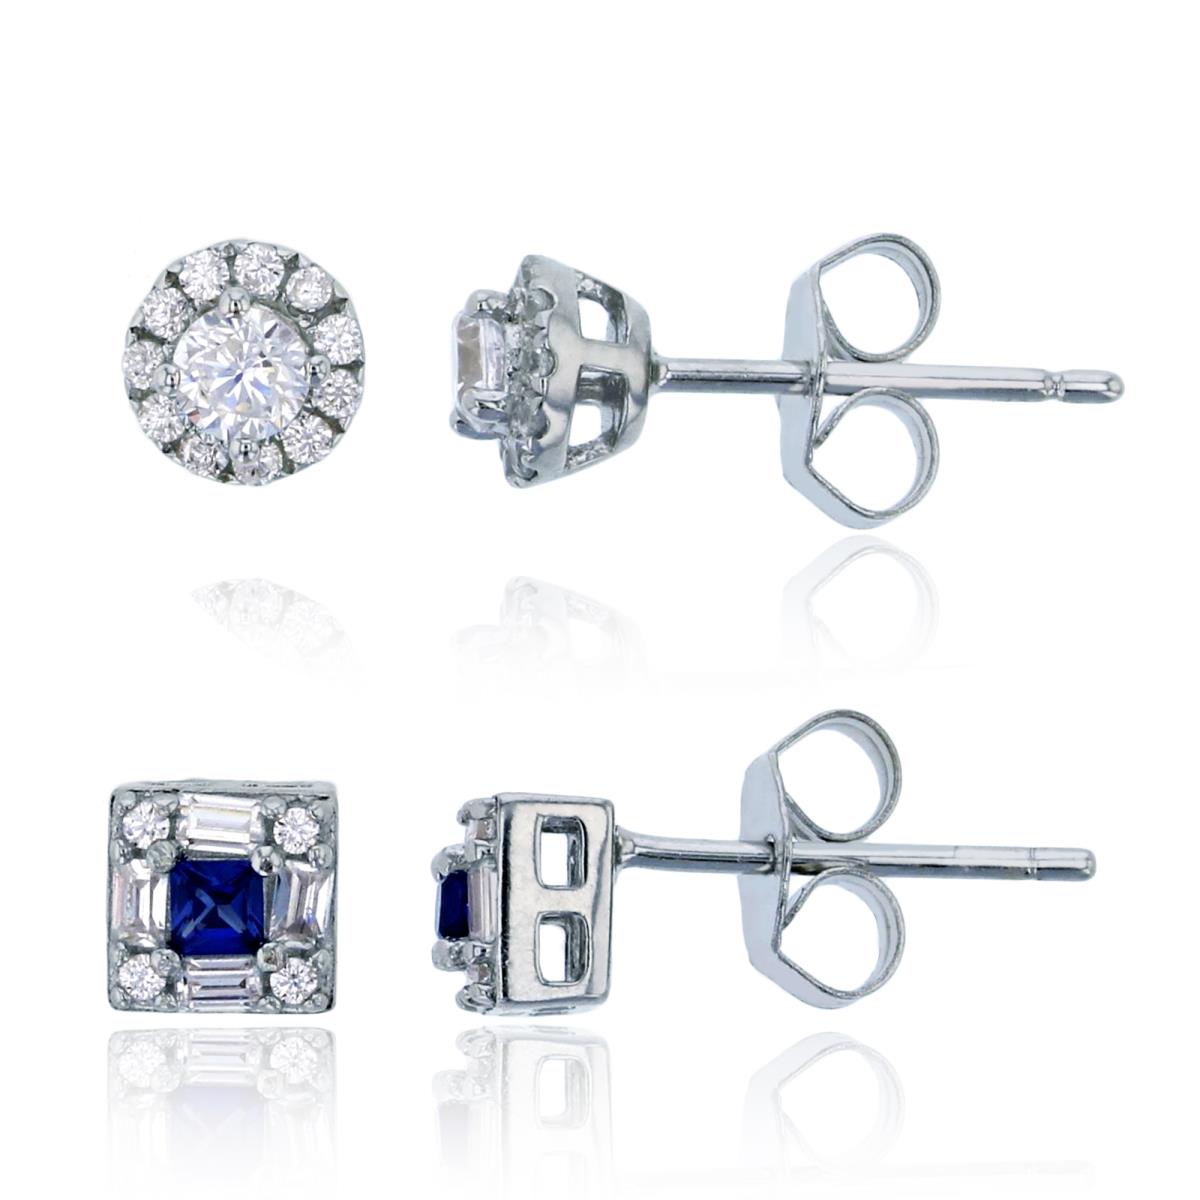 Sterling Silver Rhodium Pave Round & Square Stud Earrings Set